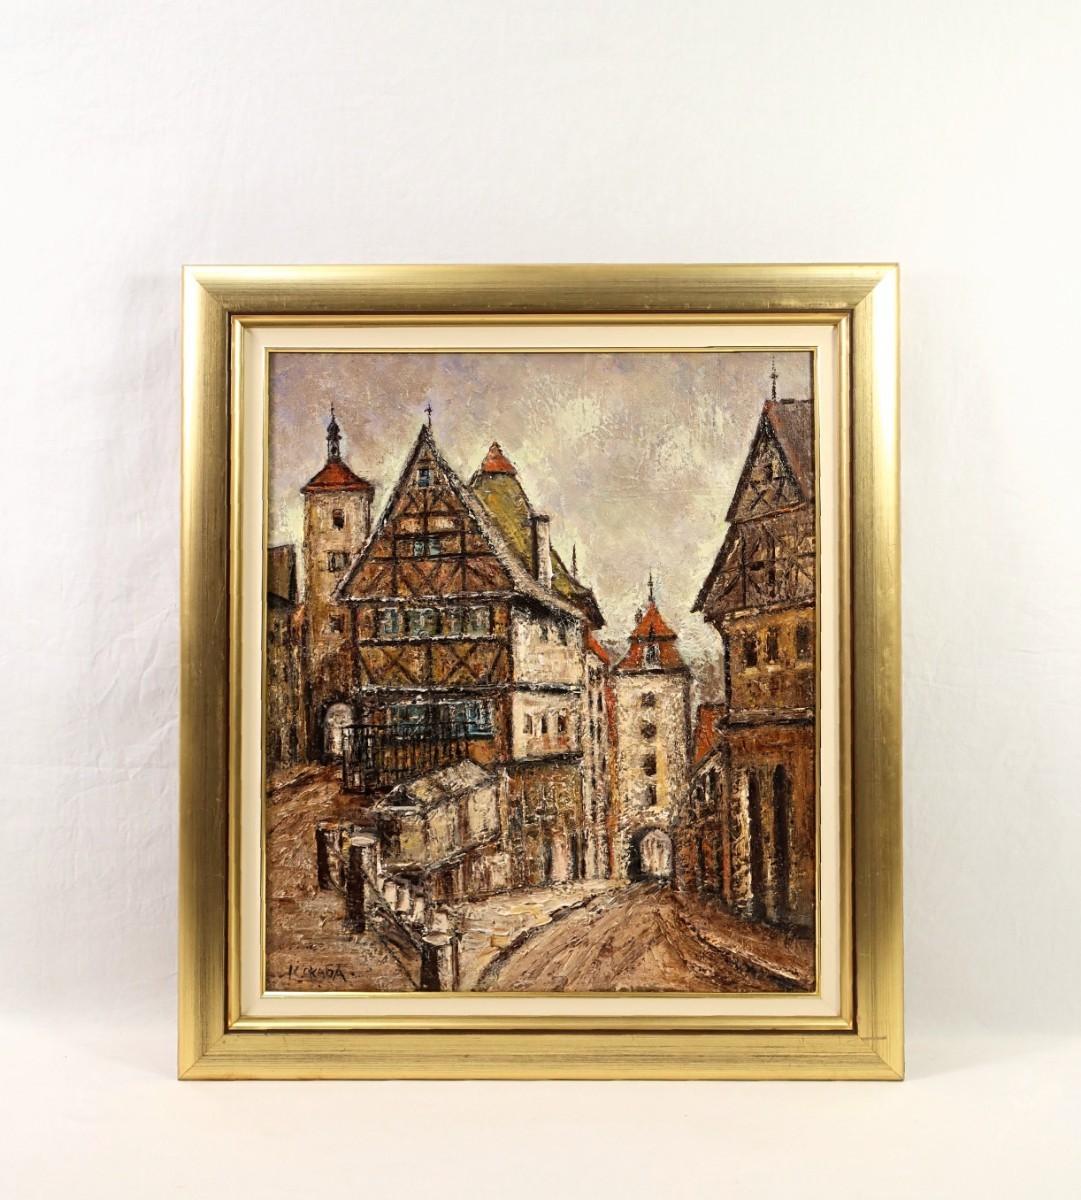 Genuine work by Kenzo Okada Oil painting Walled Town, Germany, Rothenburg Image size F10 Born in Gifu Prefecture Heavy color tone, Drawing a tasteful streetscape with powerful brushstrokes 8013, Painting, Oil painting, Nature, Landscape painting